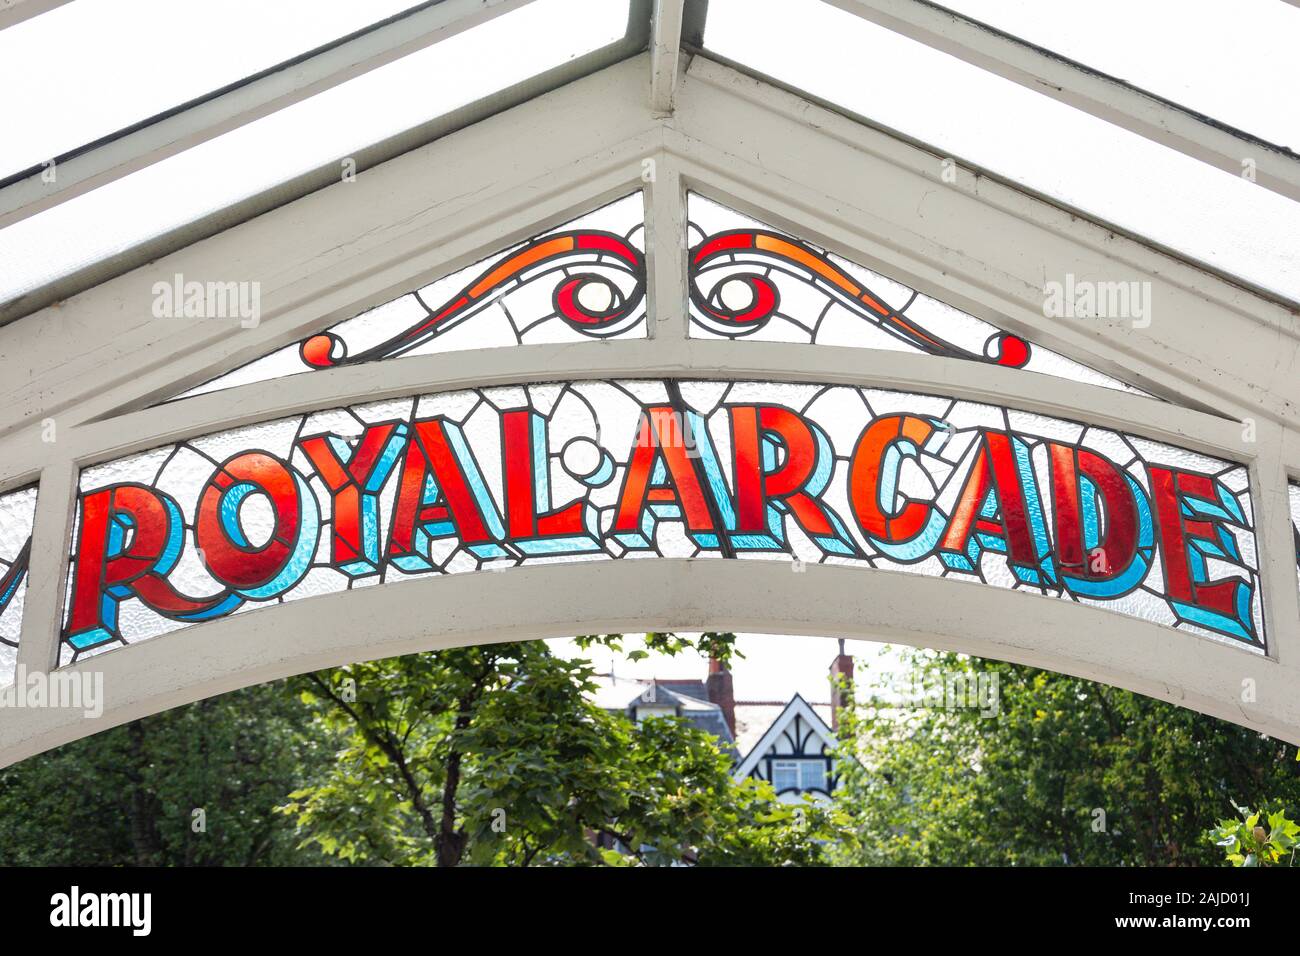 Royal Arcade stained-glass entrance sign, Lord Street, Southport, Merseyside, England, United Kingdom Stock Photo